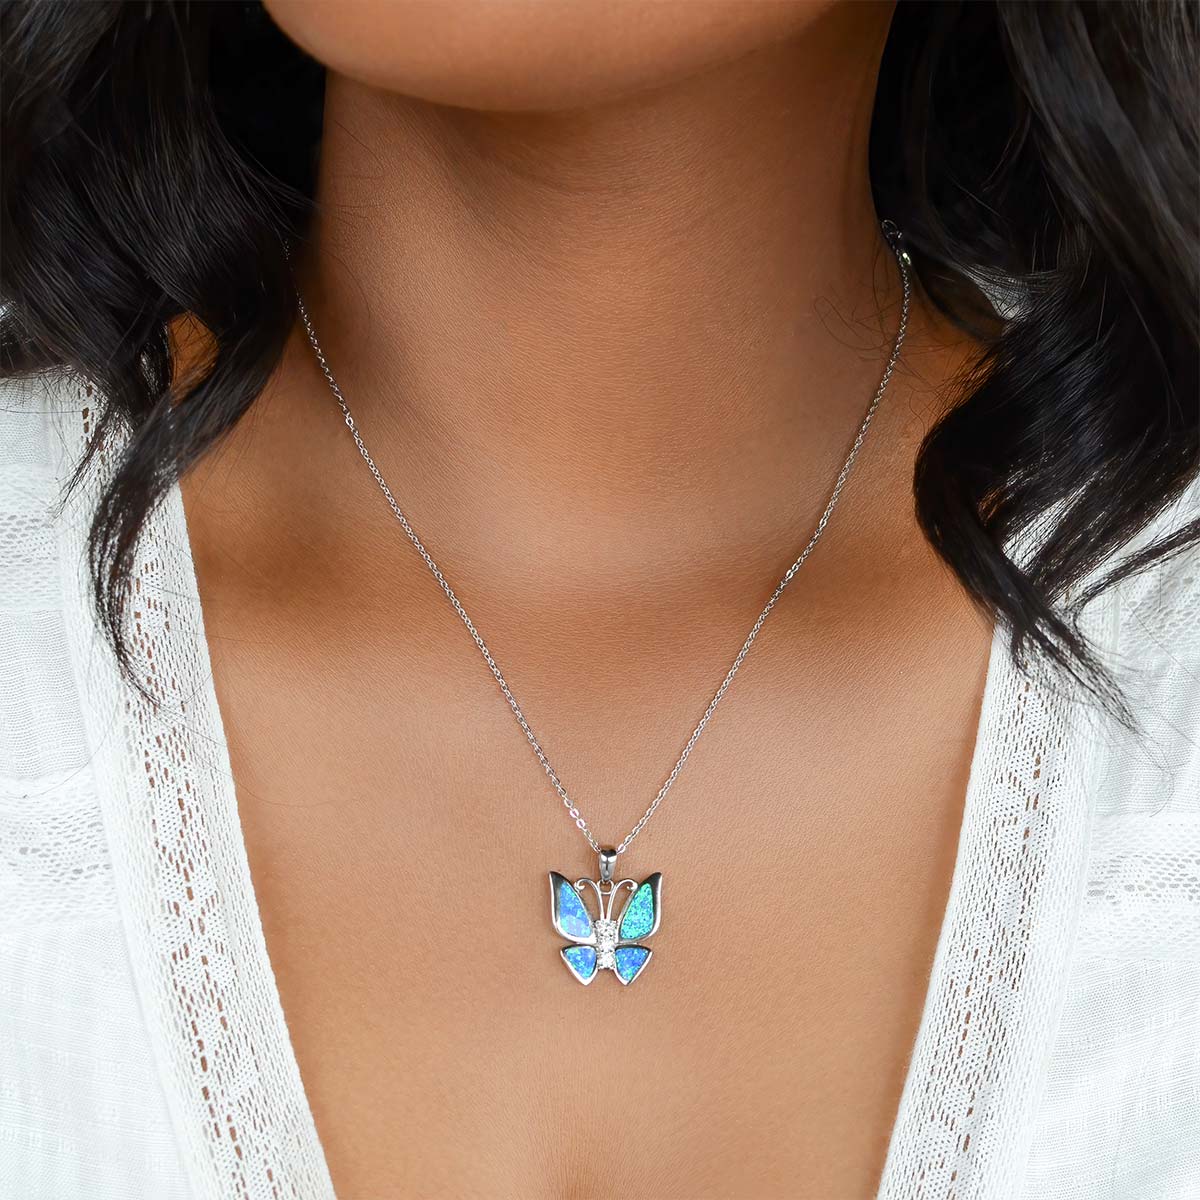 2 Sets of Be Like The Butterfly Fire Opal Butterfly Necklace Gift Set